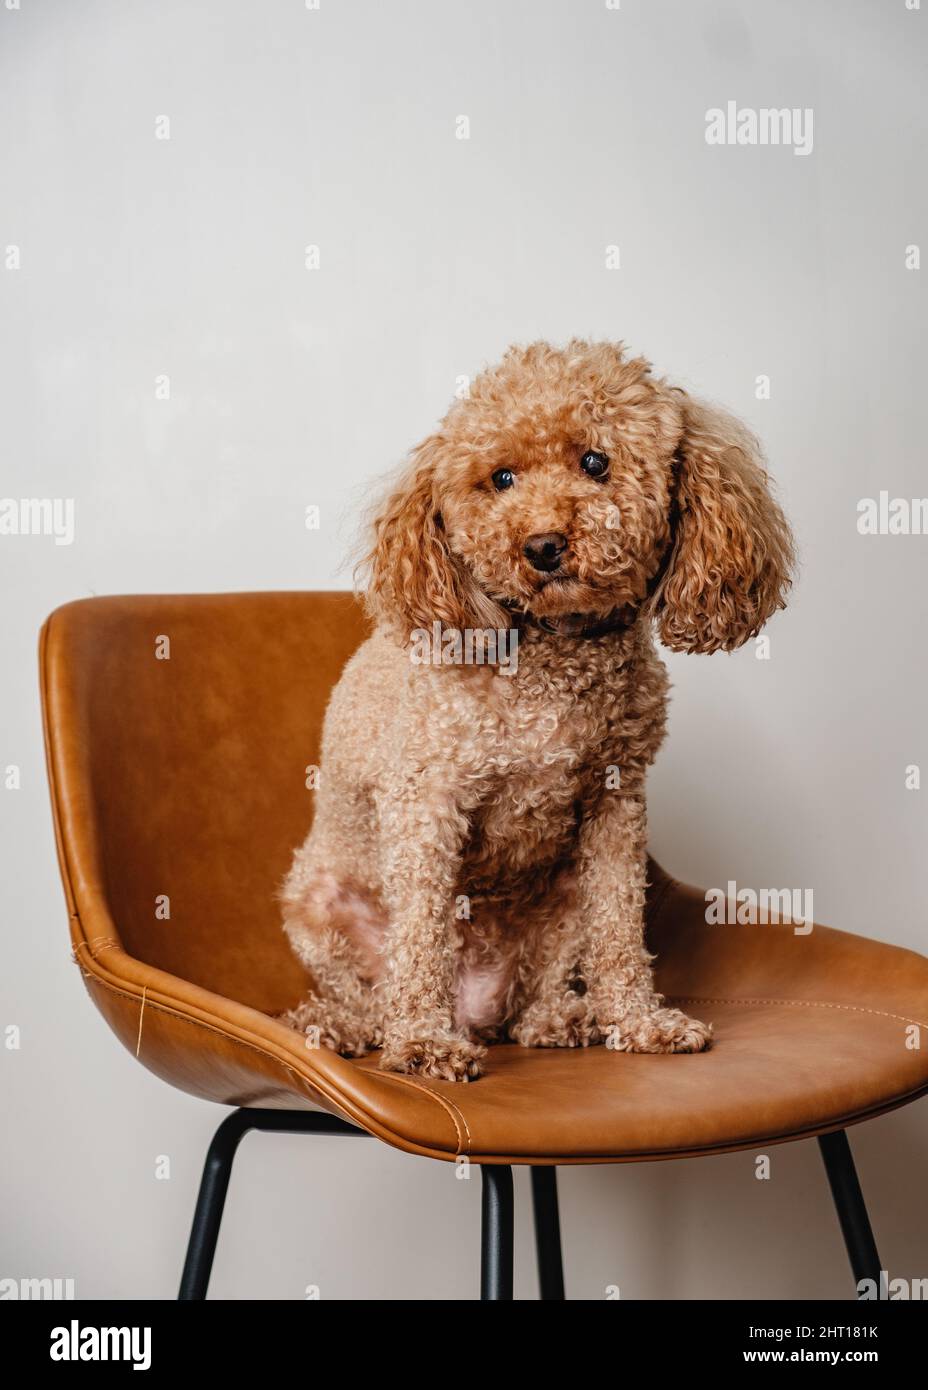 Cute fluffy soft curly fur dog poodle taking portrait photo on brown leather chair and isolated background minimal feeling Stock Photo